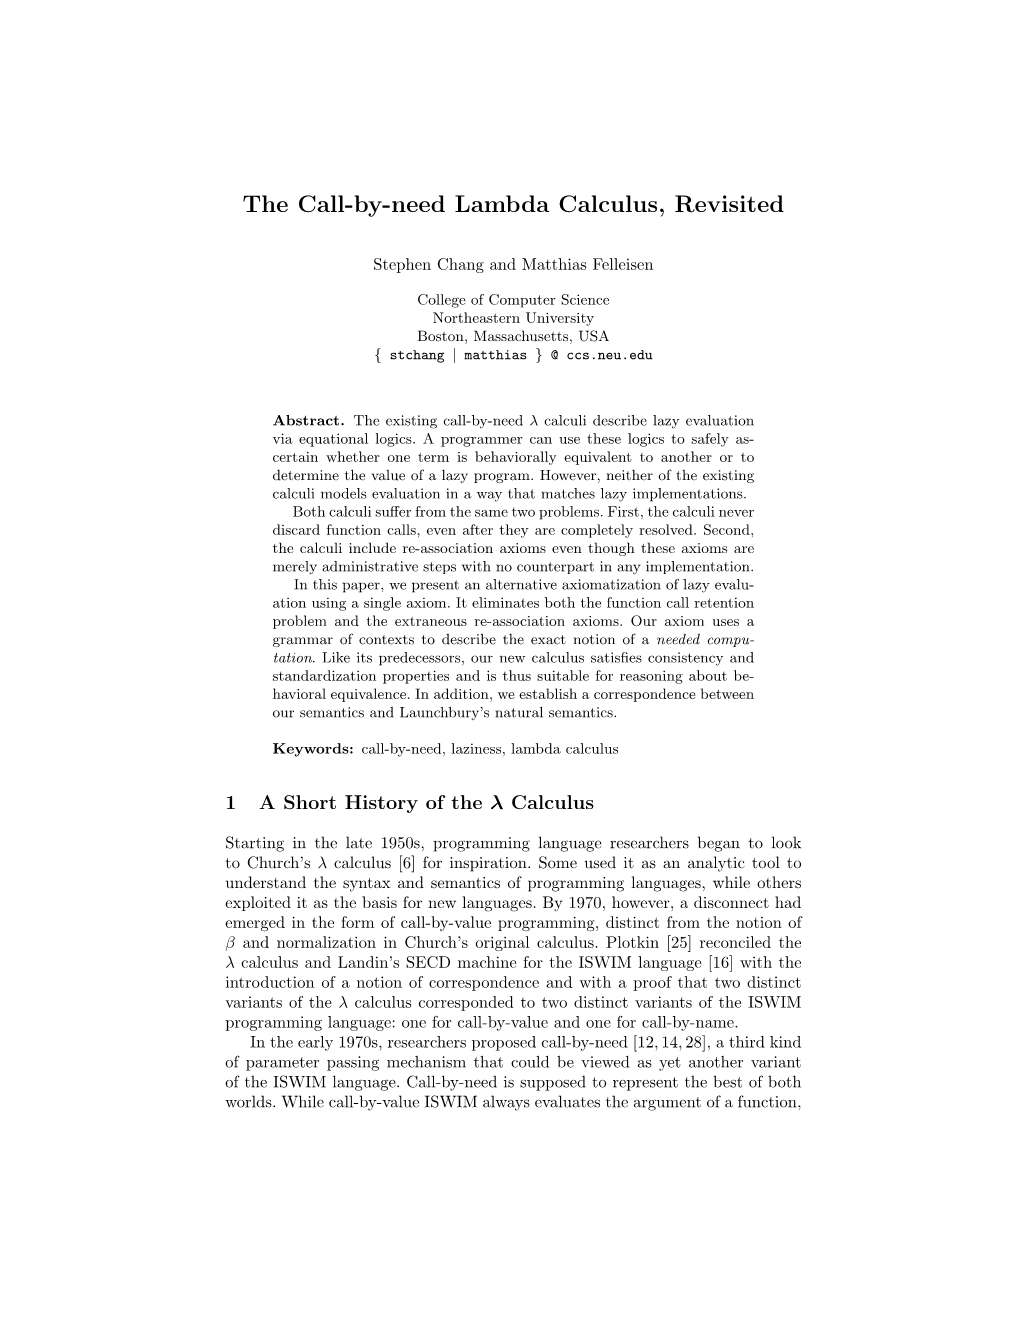 The Call-By-Need Lambda Calculus, Revisited